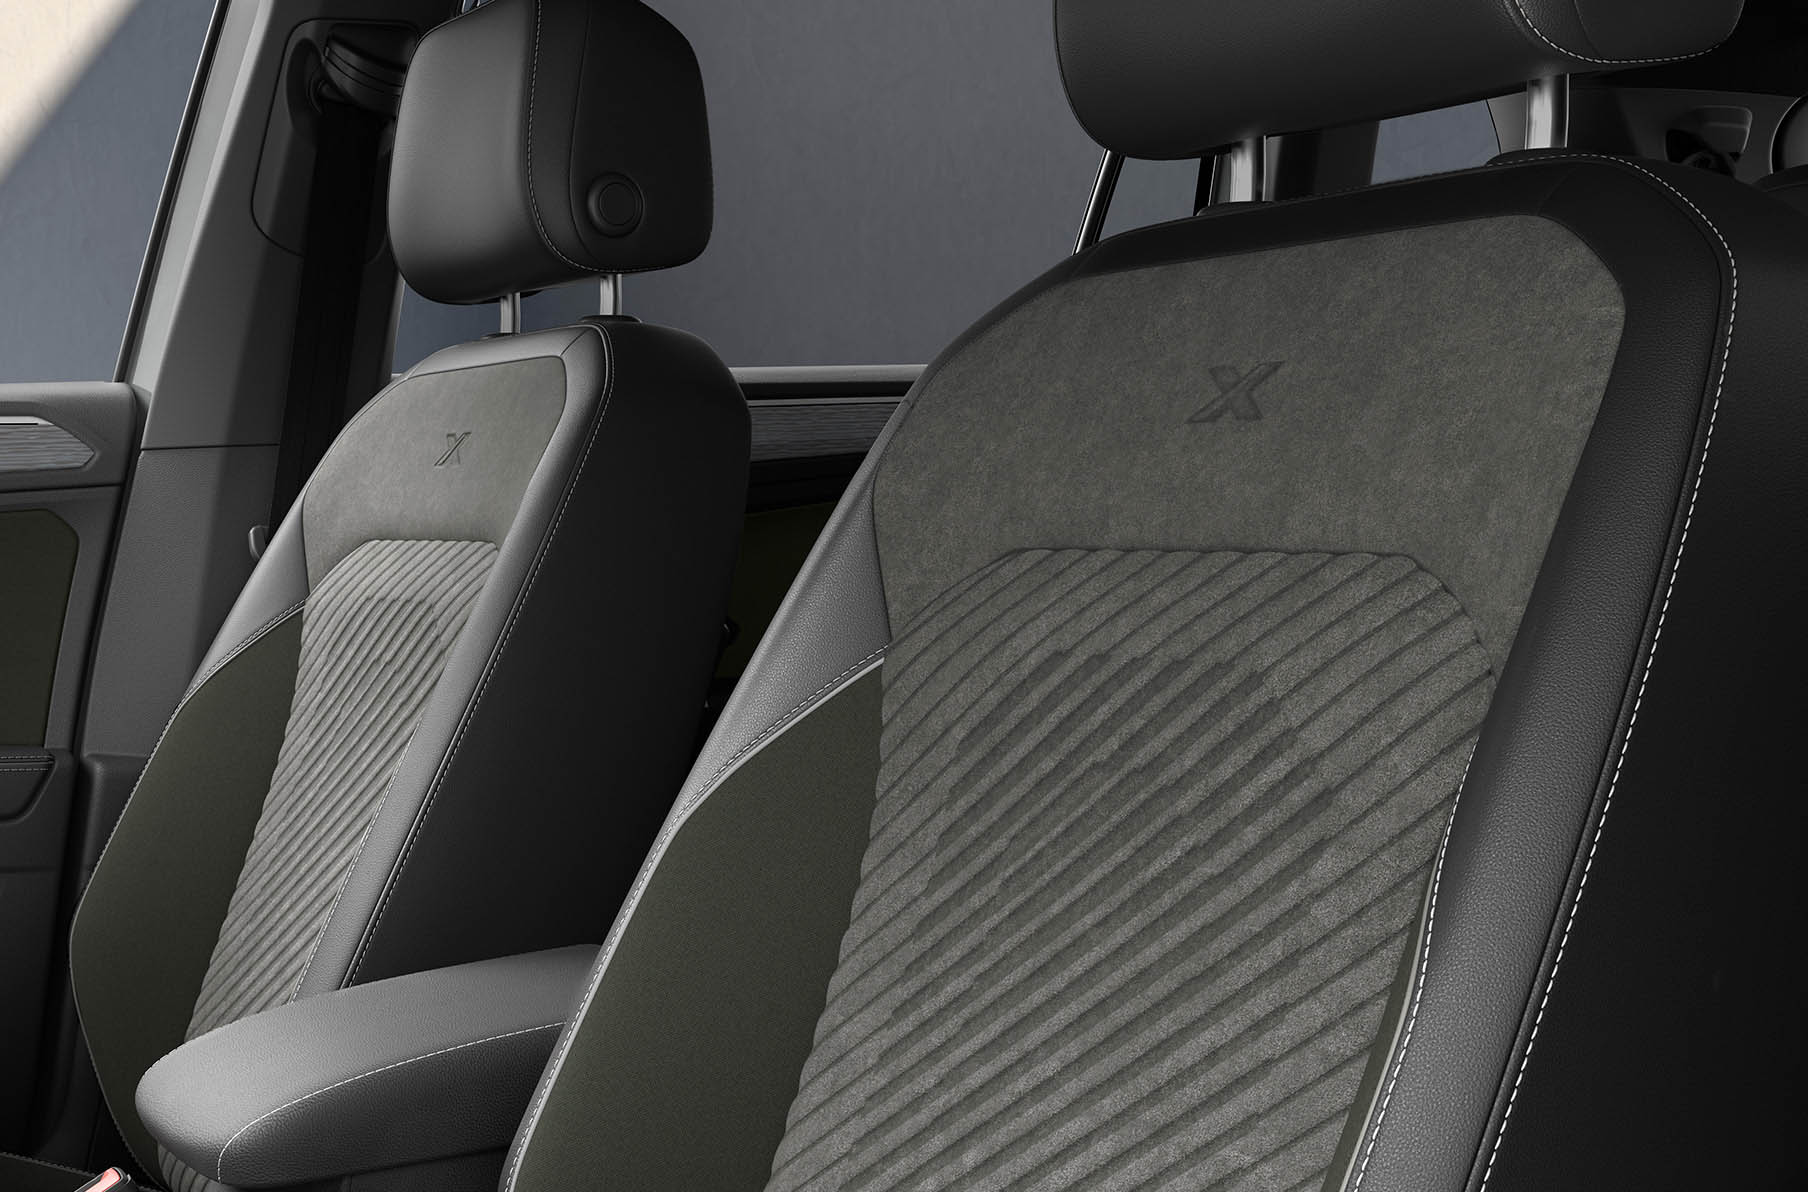 The new SEAT Tarraco XPERIENCE with DINAMICA® seats upholstery